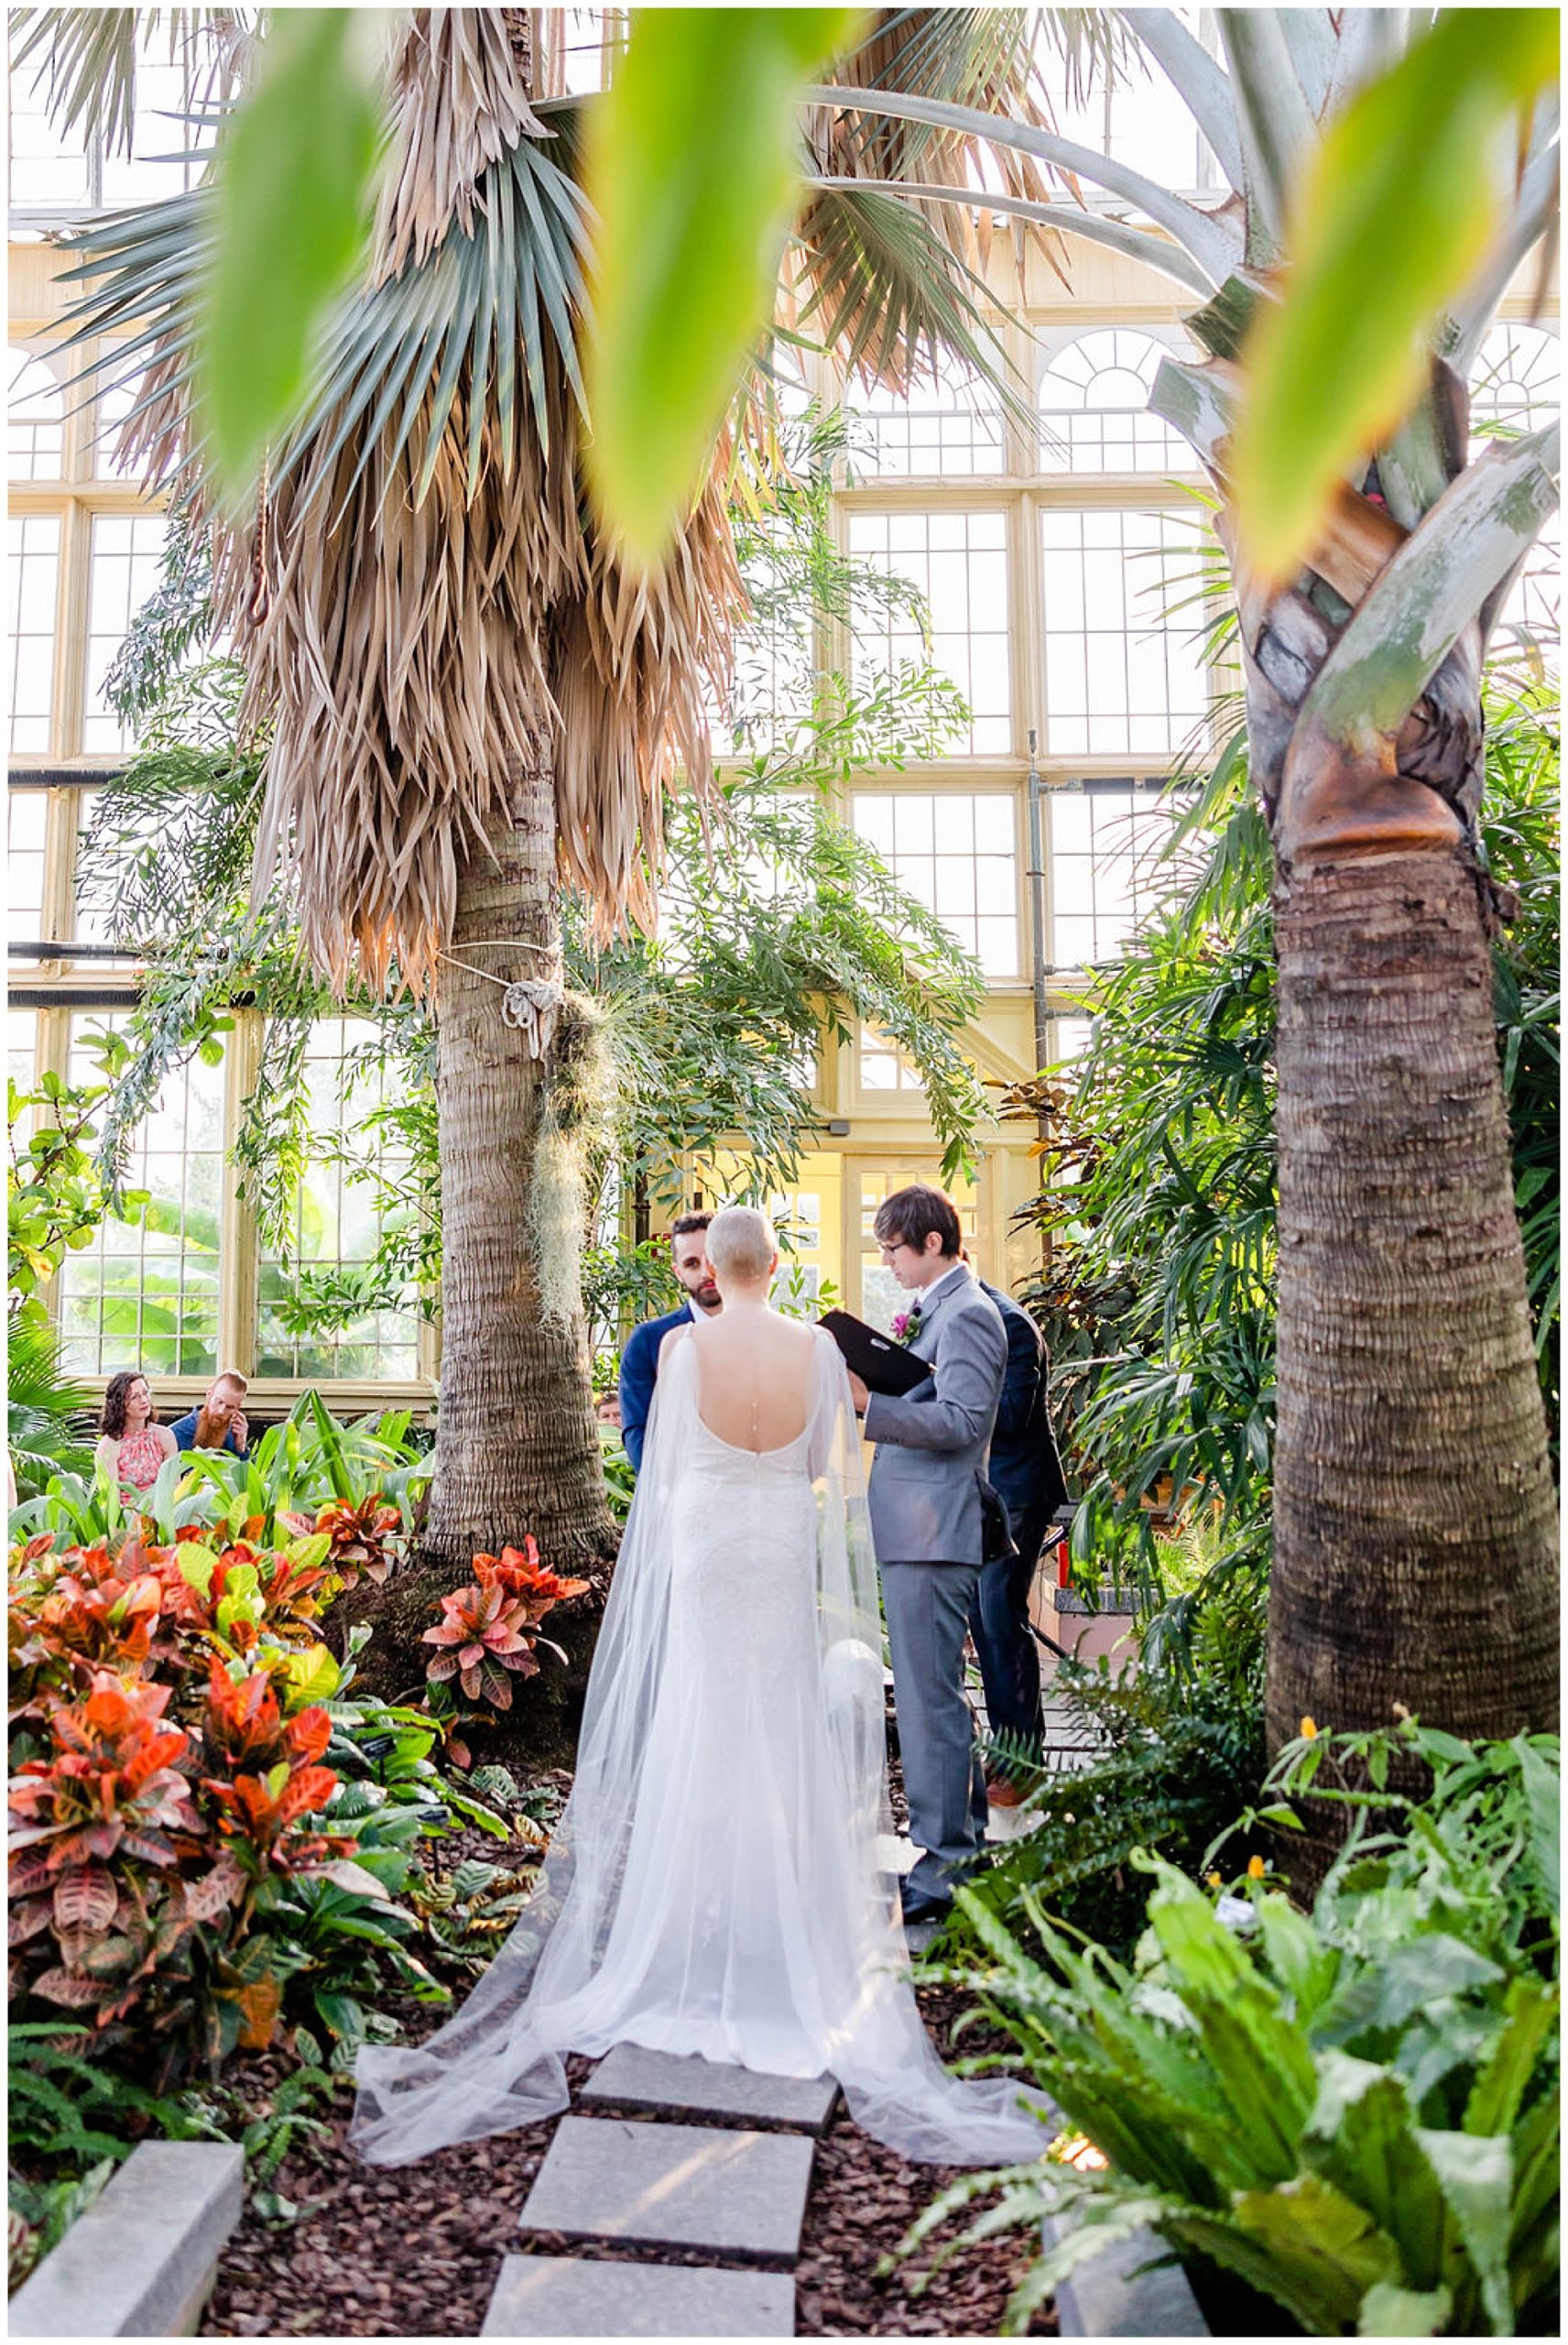 ethereal Rawlings Conservatory wedding, Baltimore wedding venues, Baltimore wedding photographer, Baltimore micro-wedding, Baltimore wedding photography, autumn wedding aesthetic, botanical gardens wedding, Baltimore botanical garden wedding, DC wedding photographer, Rachel E.H. Photography, couple at alter, alter under palm trees